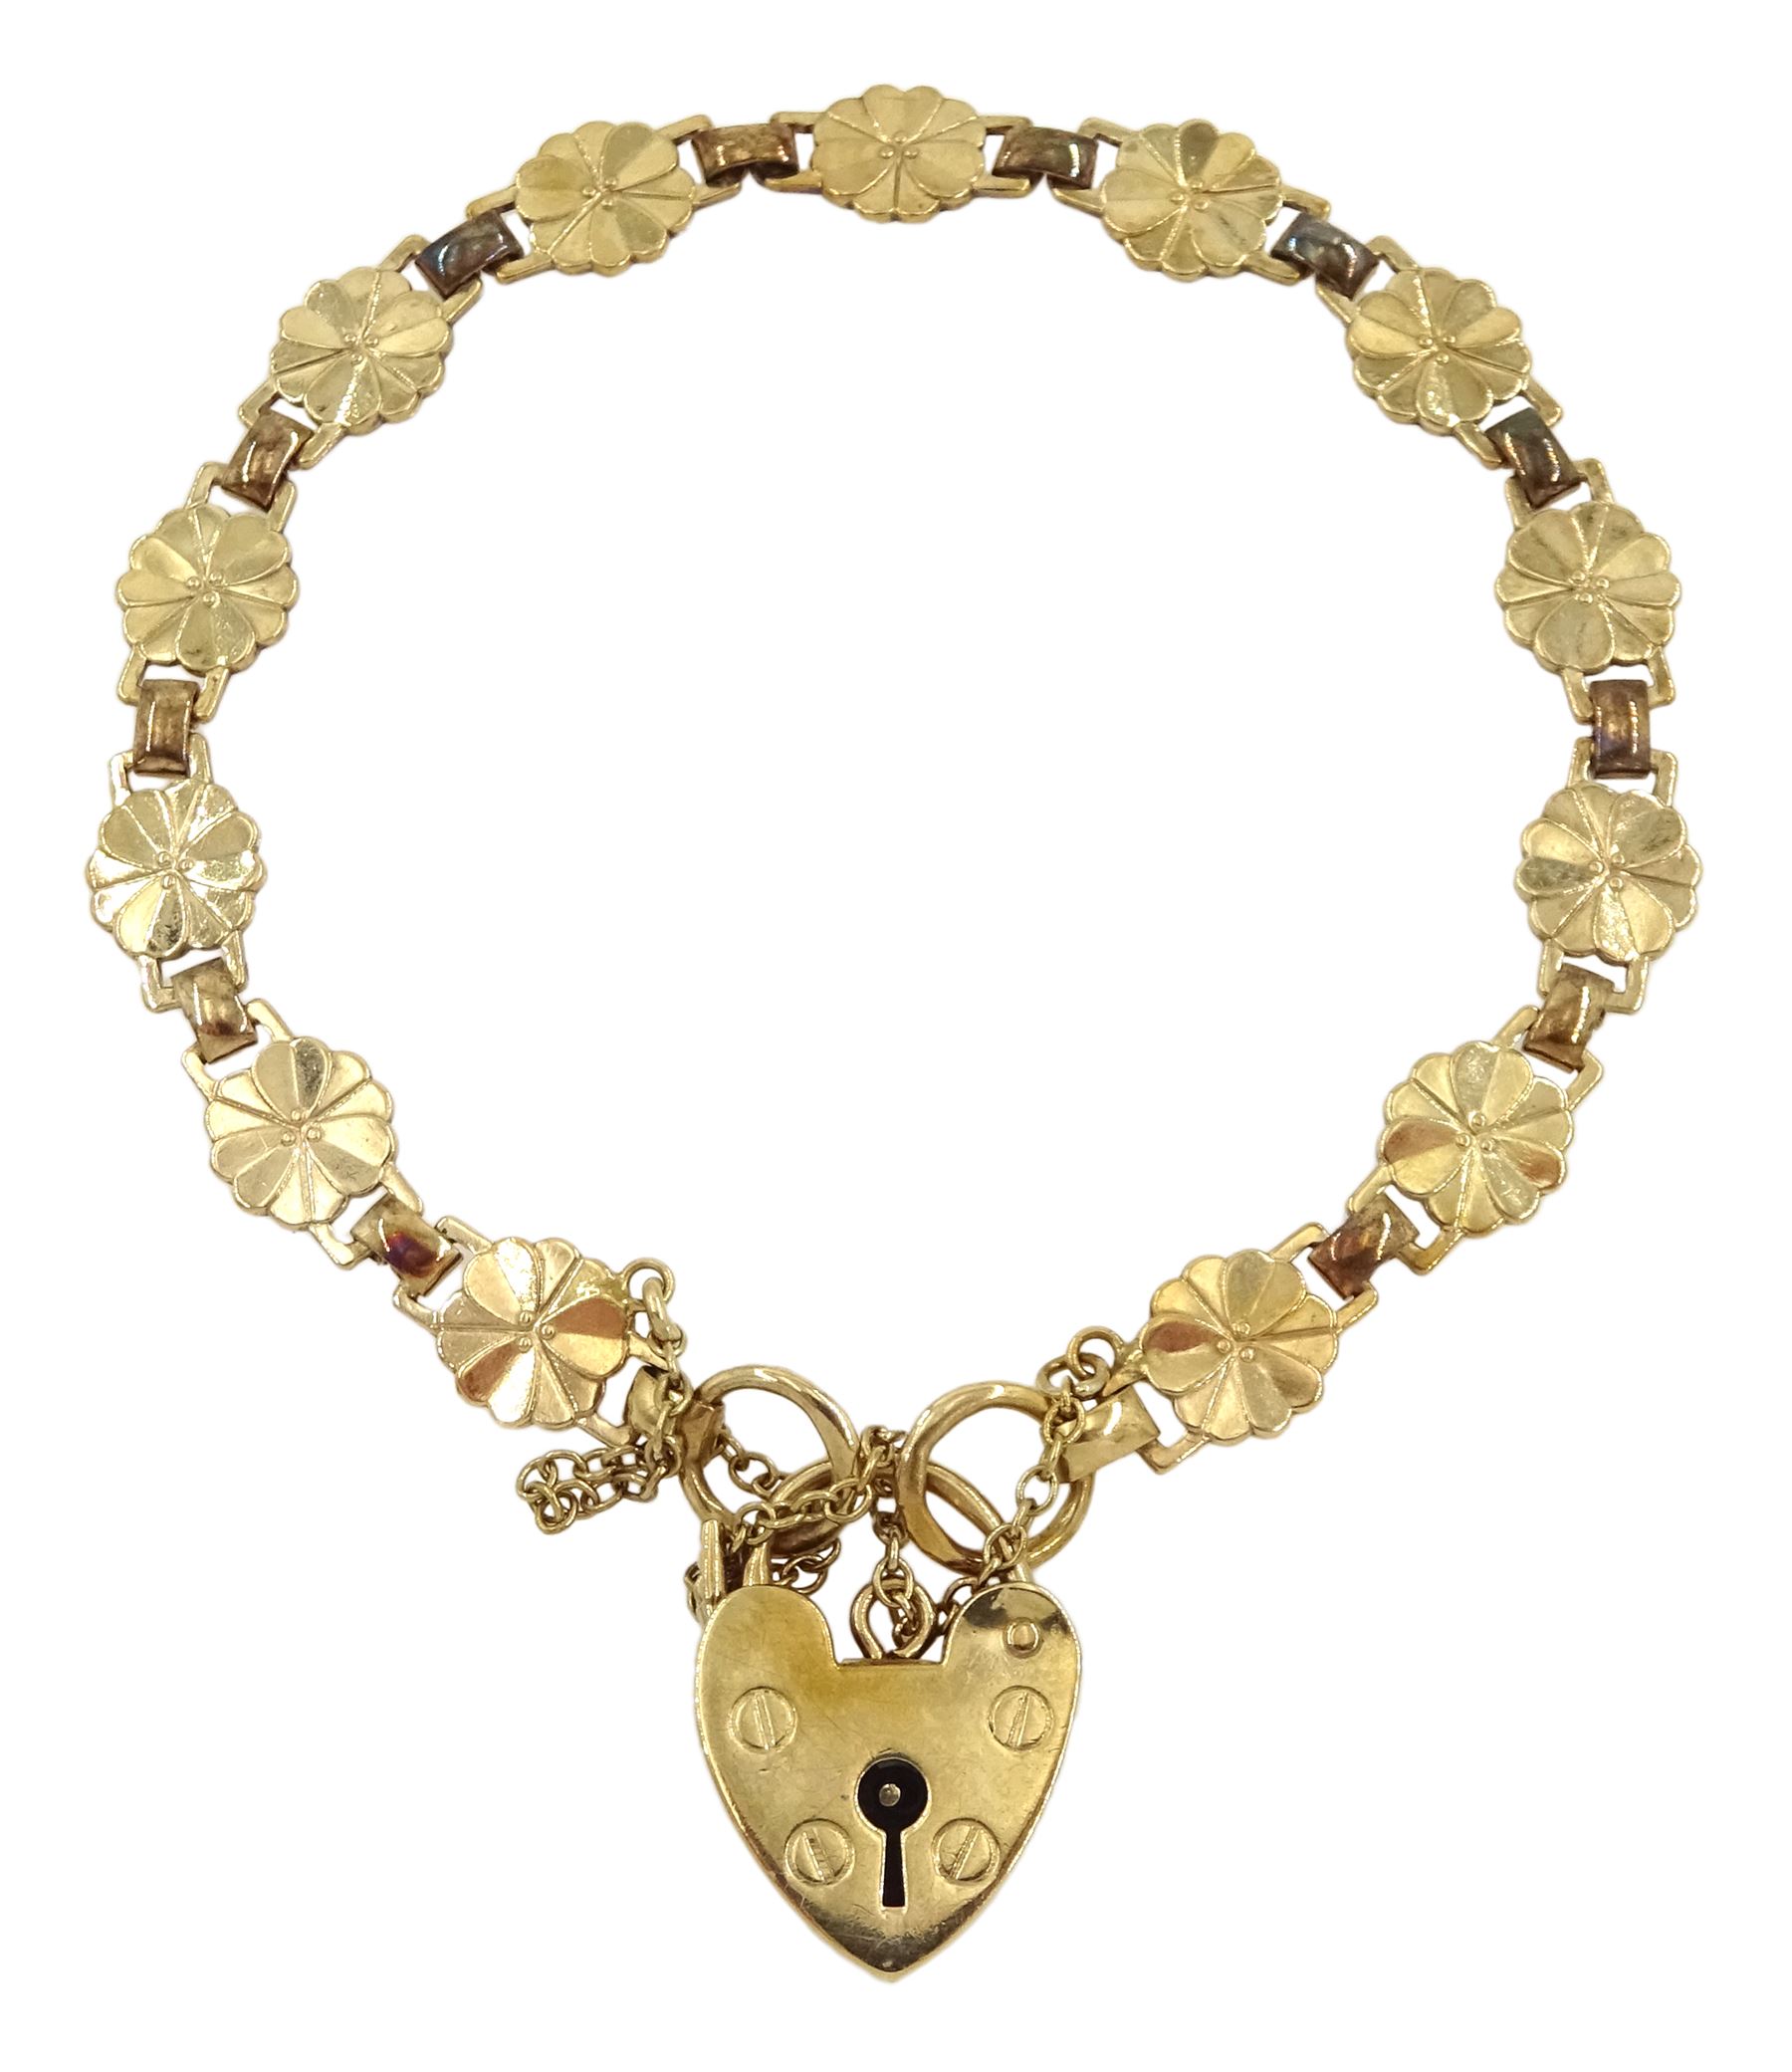 9ct gold flower link bracelet with heart padlock clasp